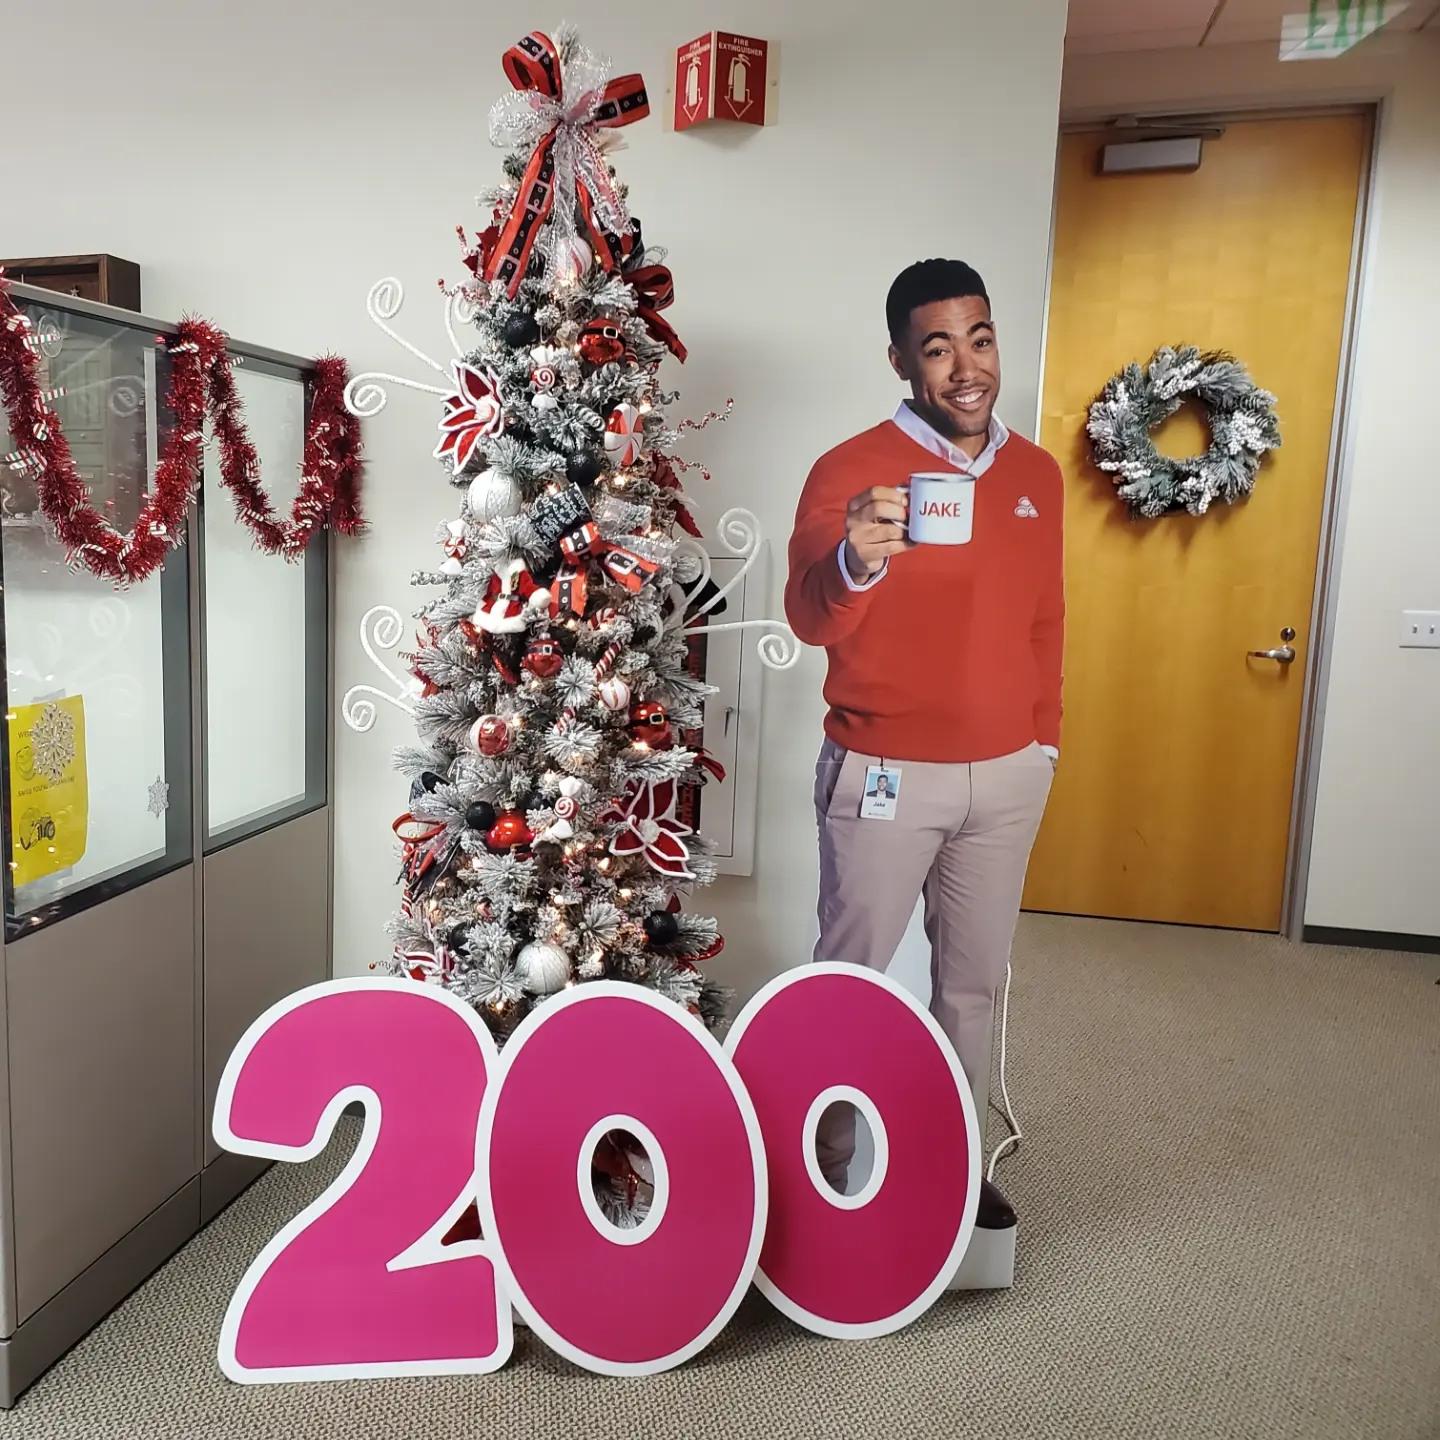 Getting the office into the holiday spirit!